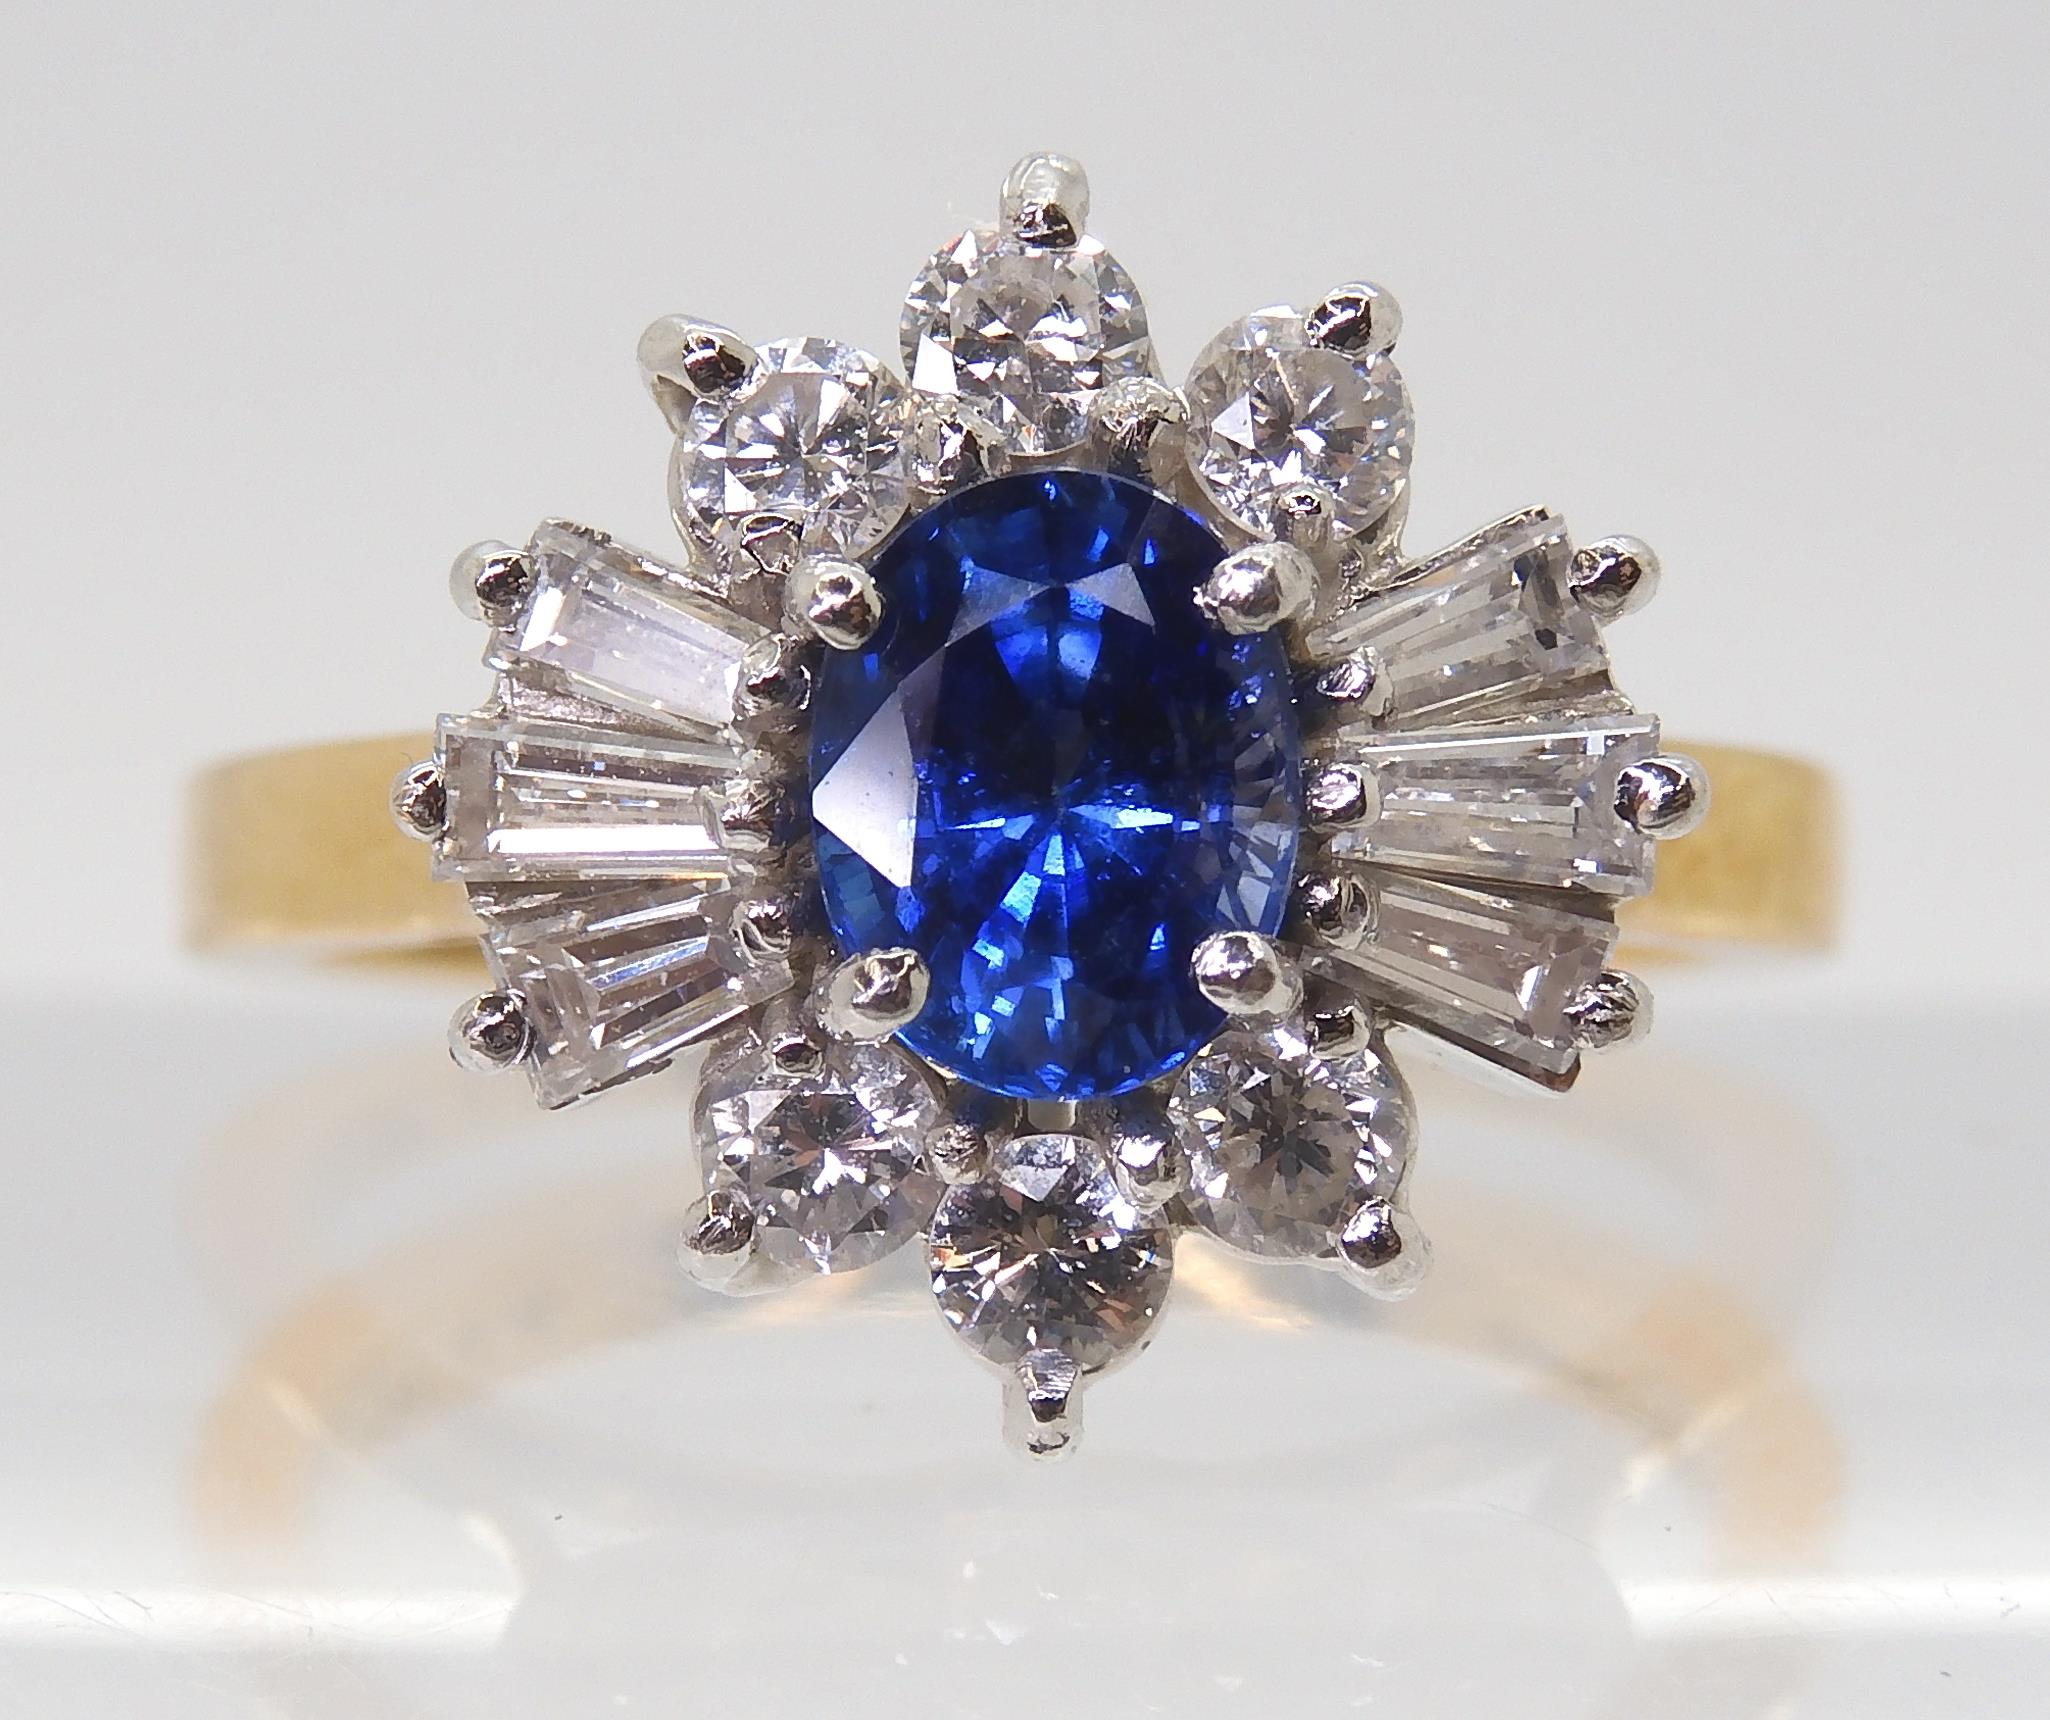 A SAPPHIRE & DIAMOND CLUSTER RING set in 18ct yellow and white gold, the starburst configuration